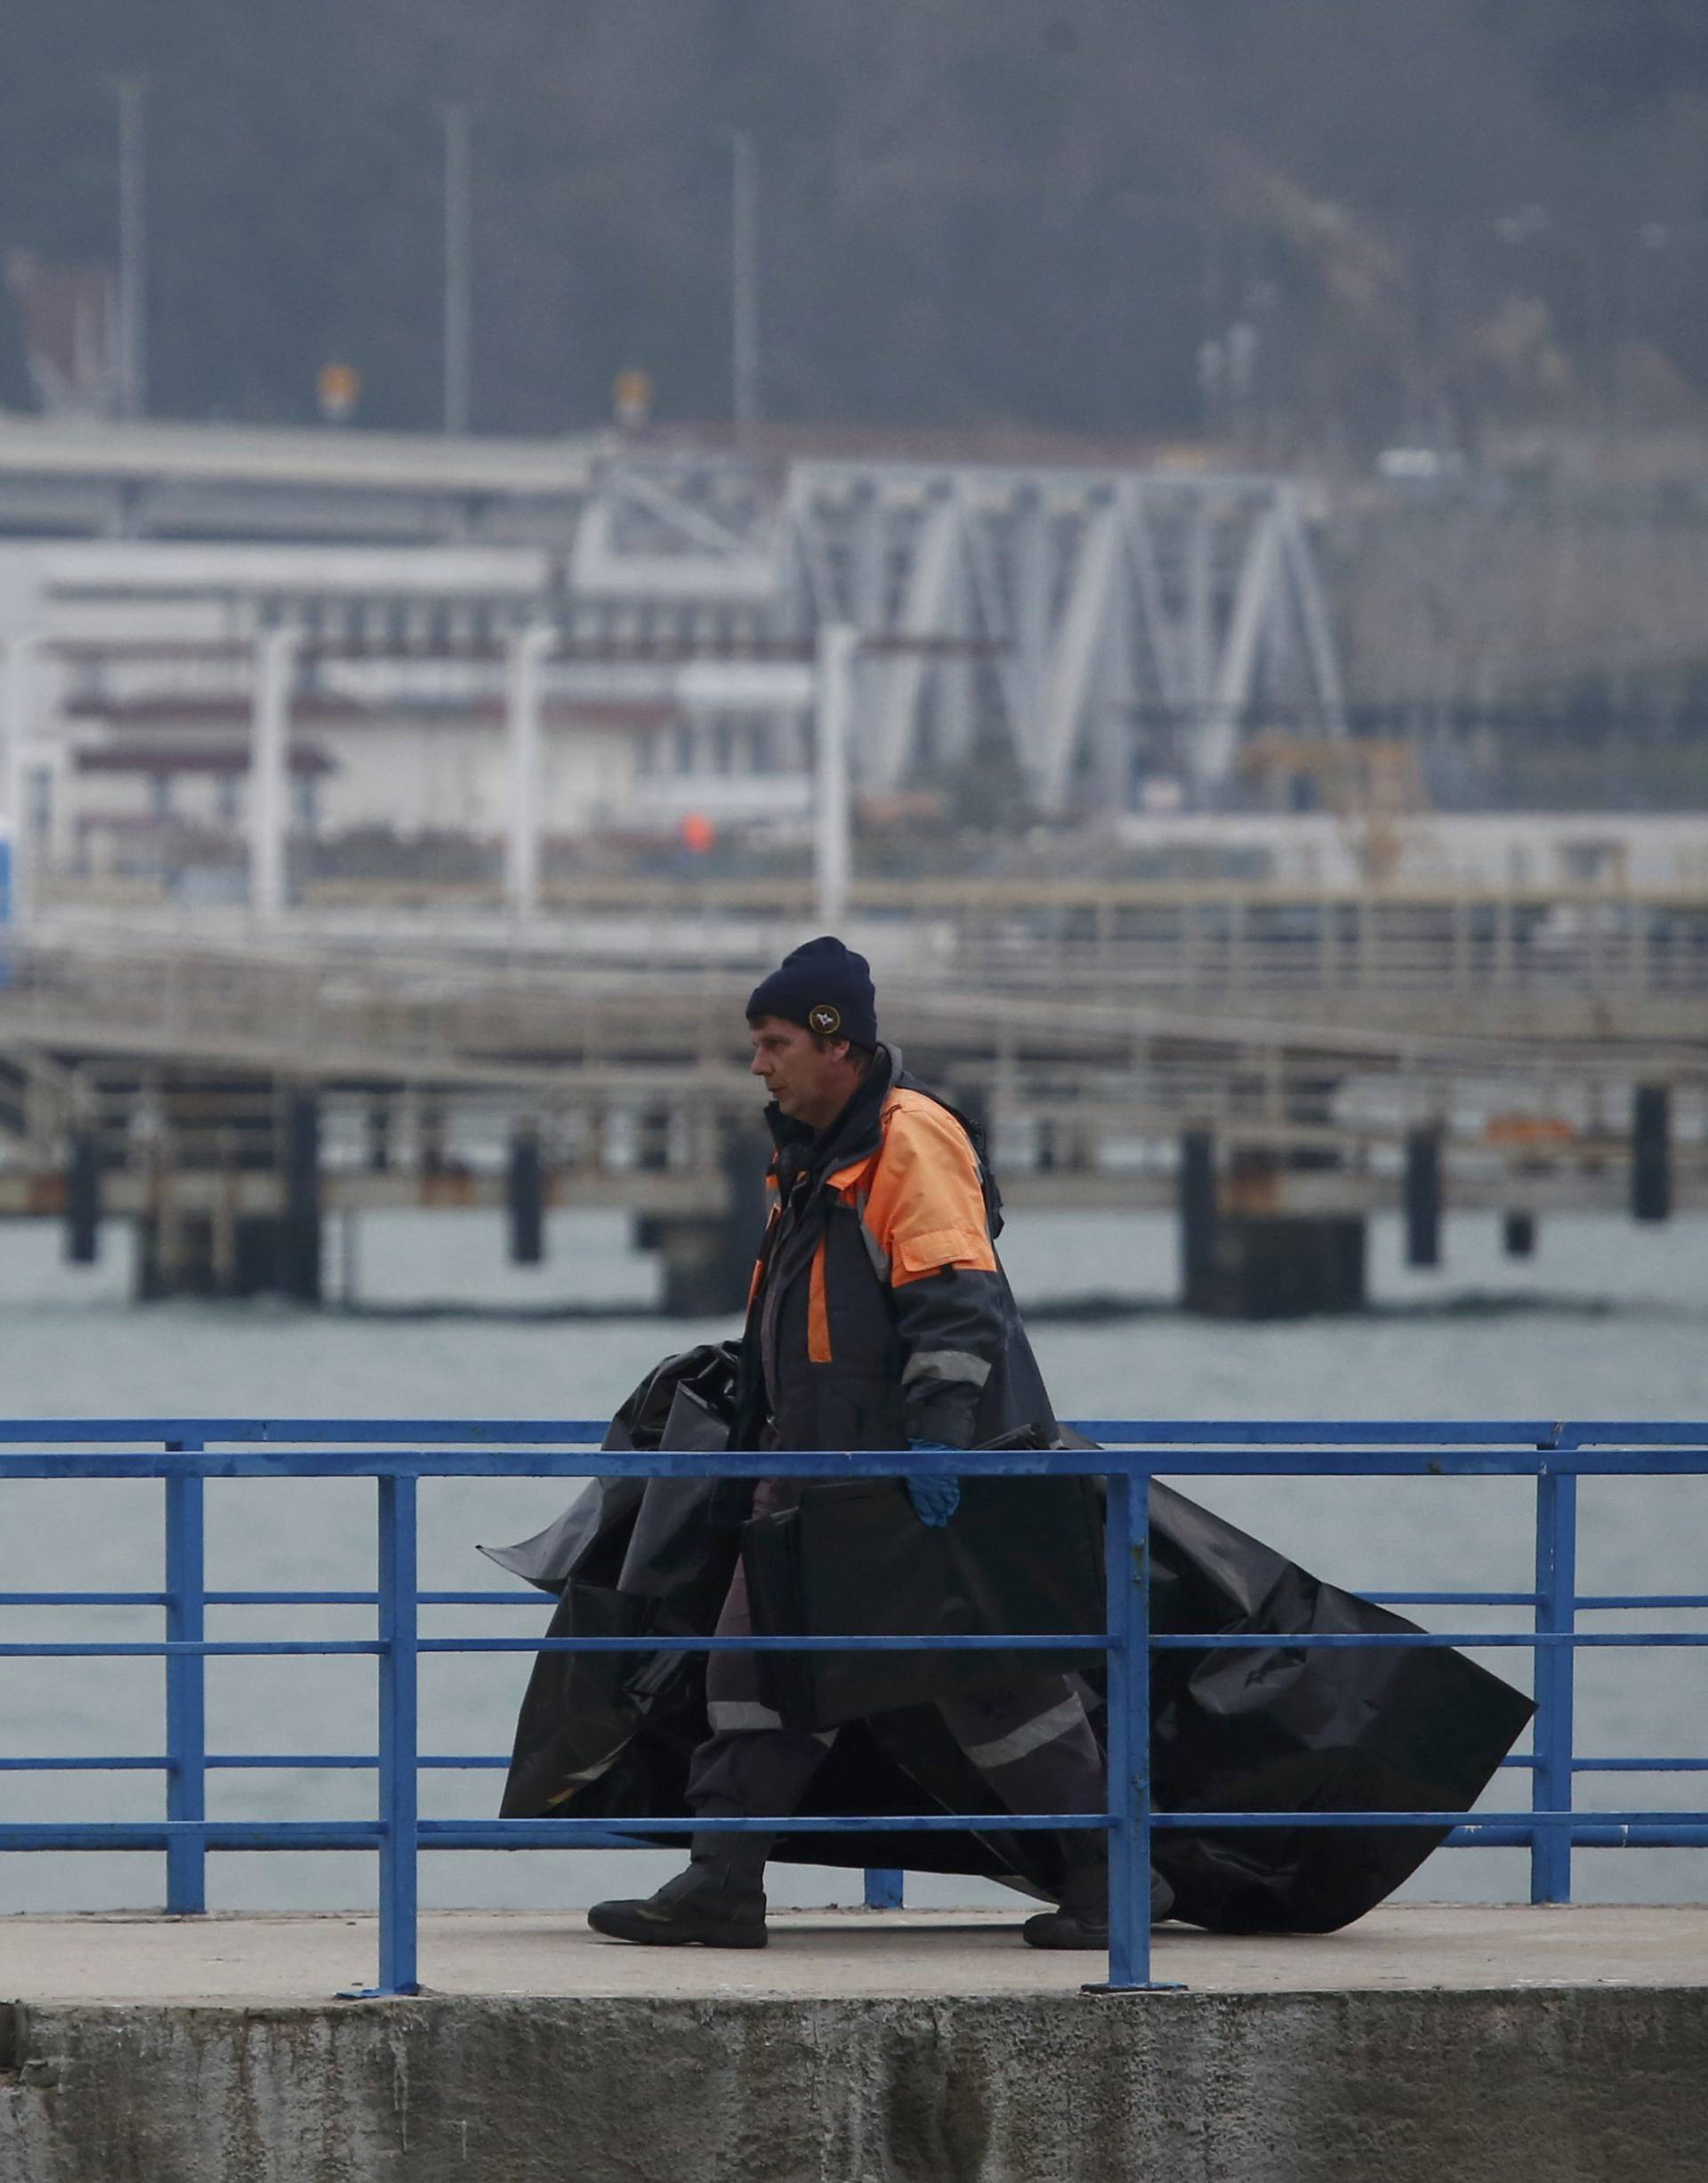 Russian Emergencies Ministry member carries plastic bags while walking on pier near crash site of Russian military Tu-154 plane in Black Sea in Sochi suburb of Khosta